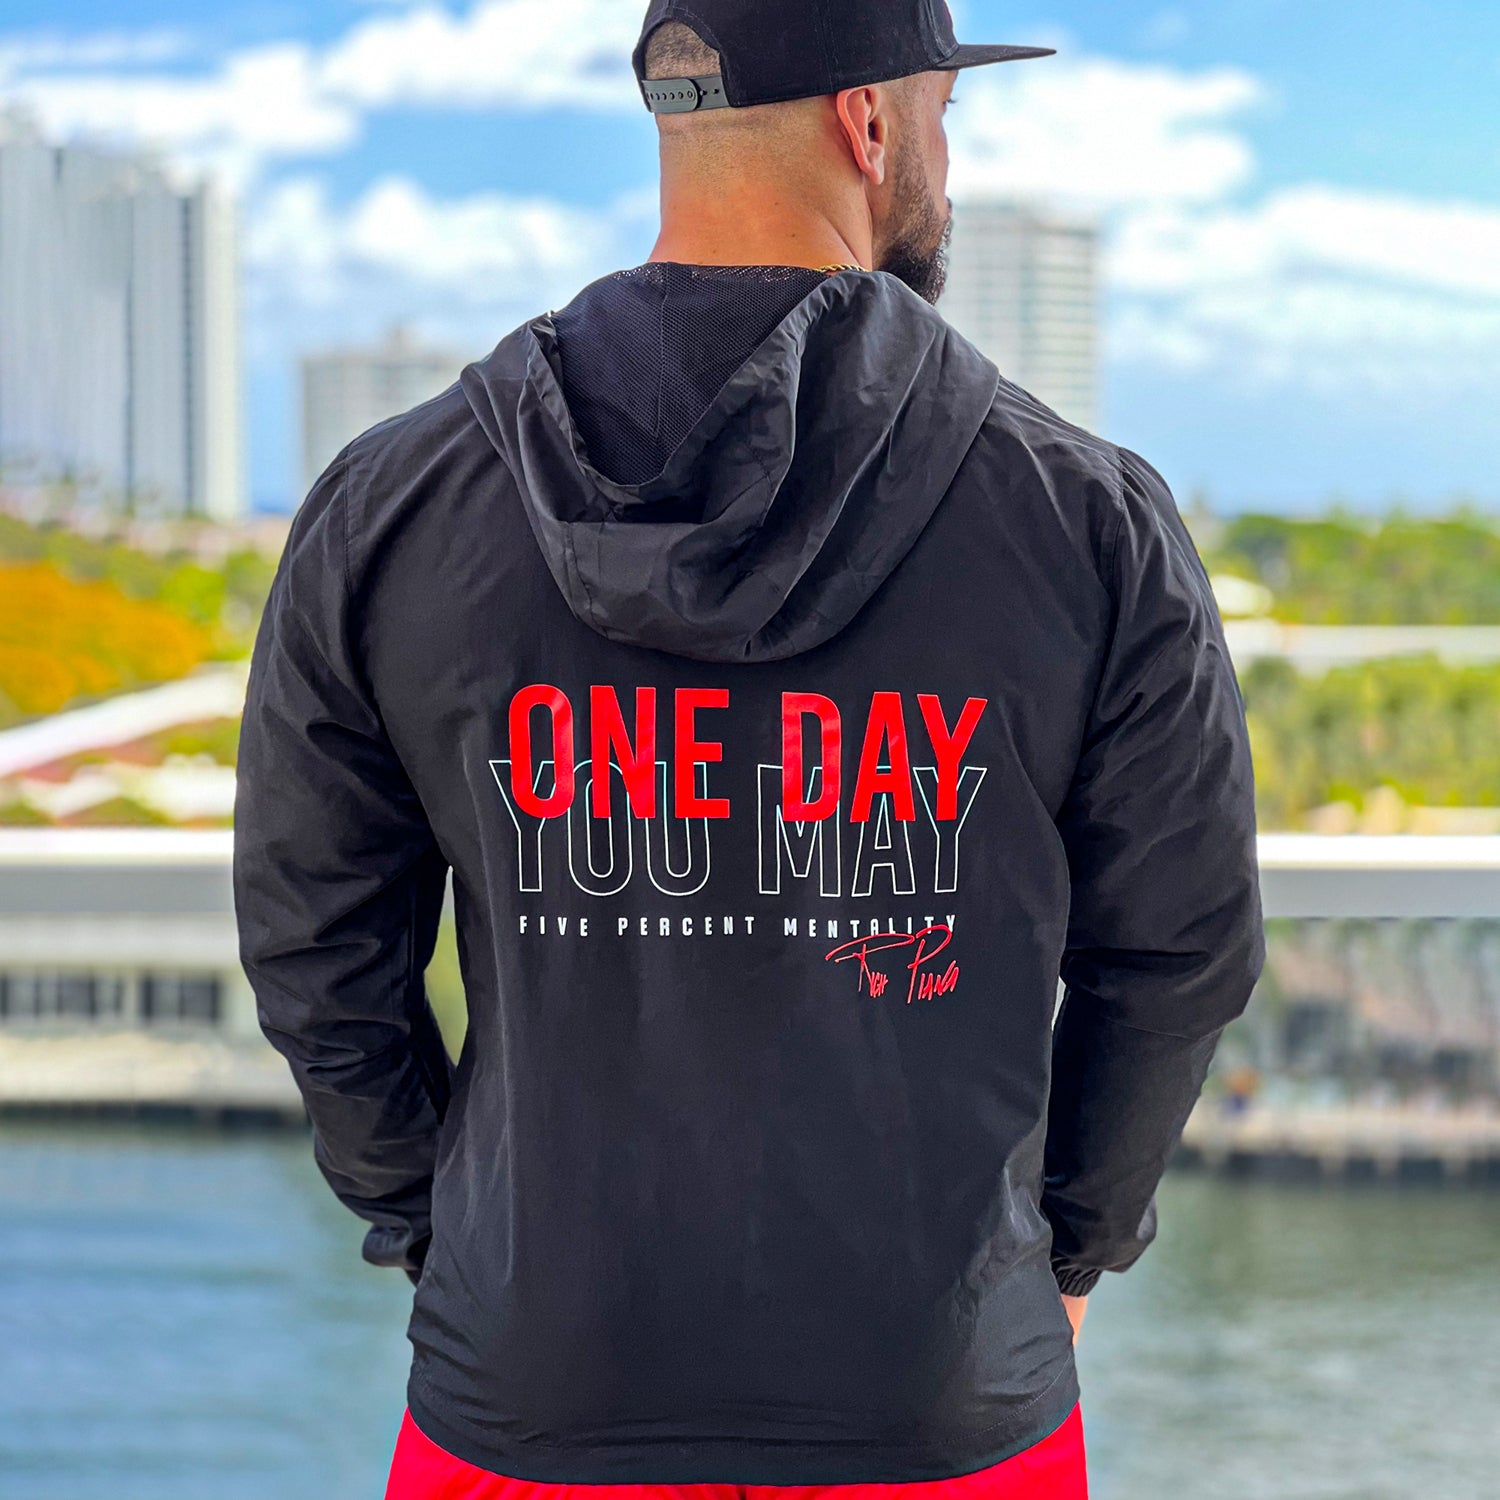 One Day You May Windbreaker (Black) - 5% Nutrition